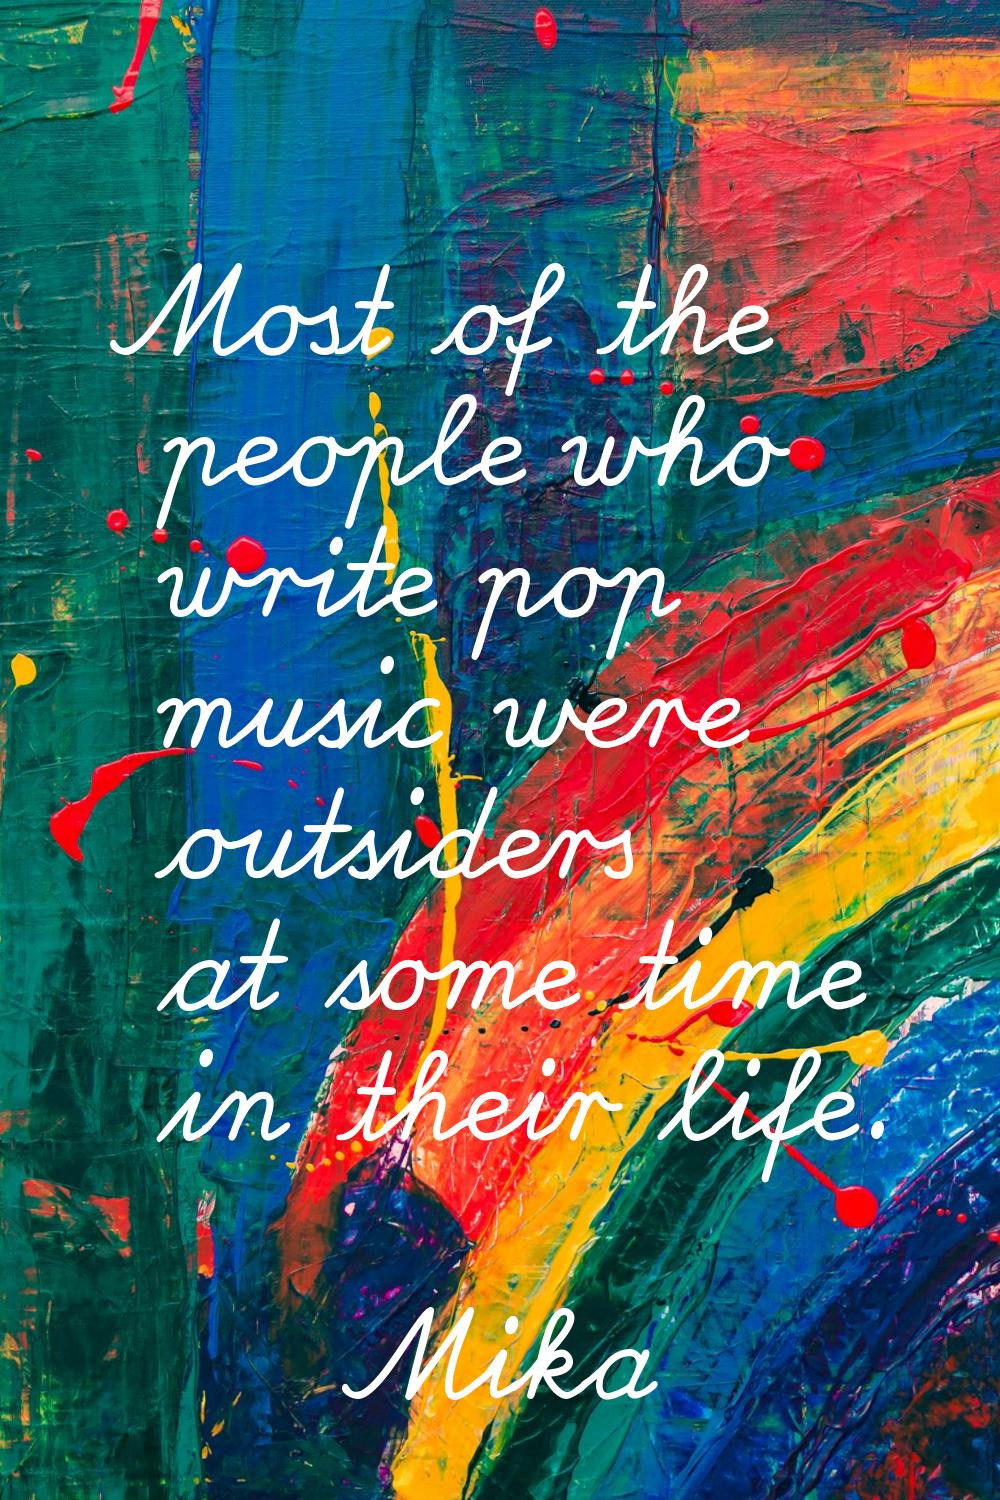 Most of the people who write pop music were outsiders at some time in their life.